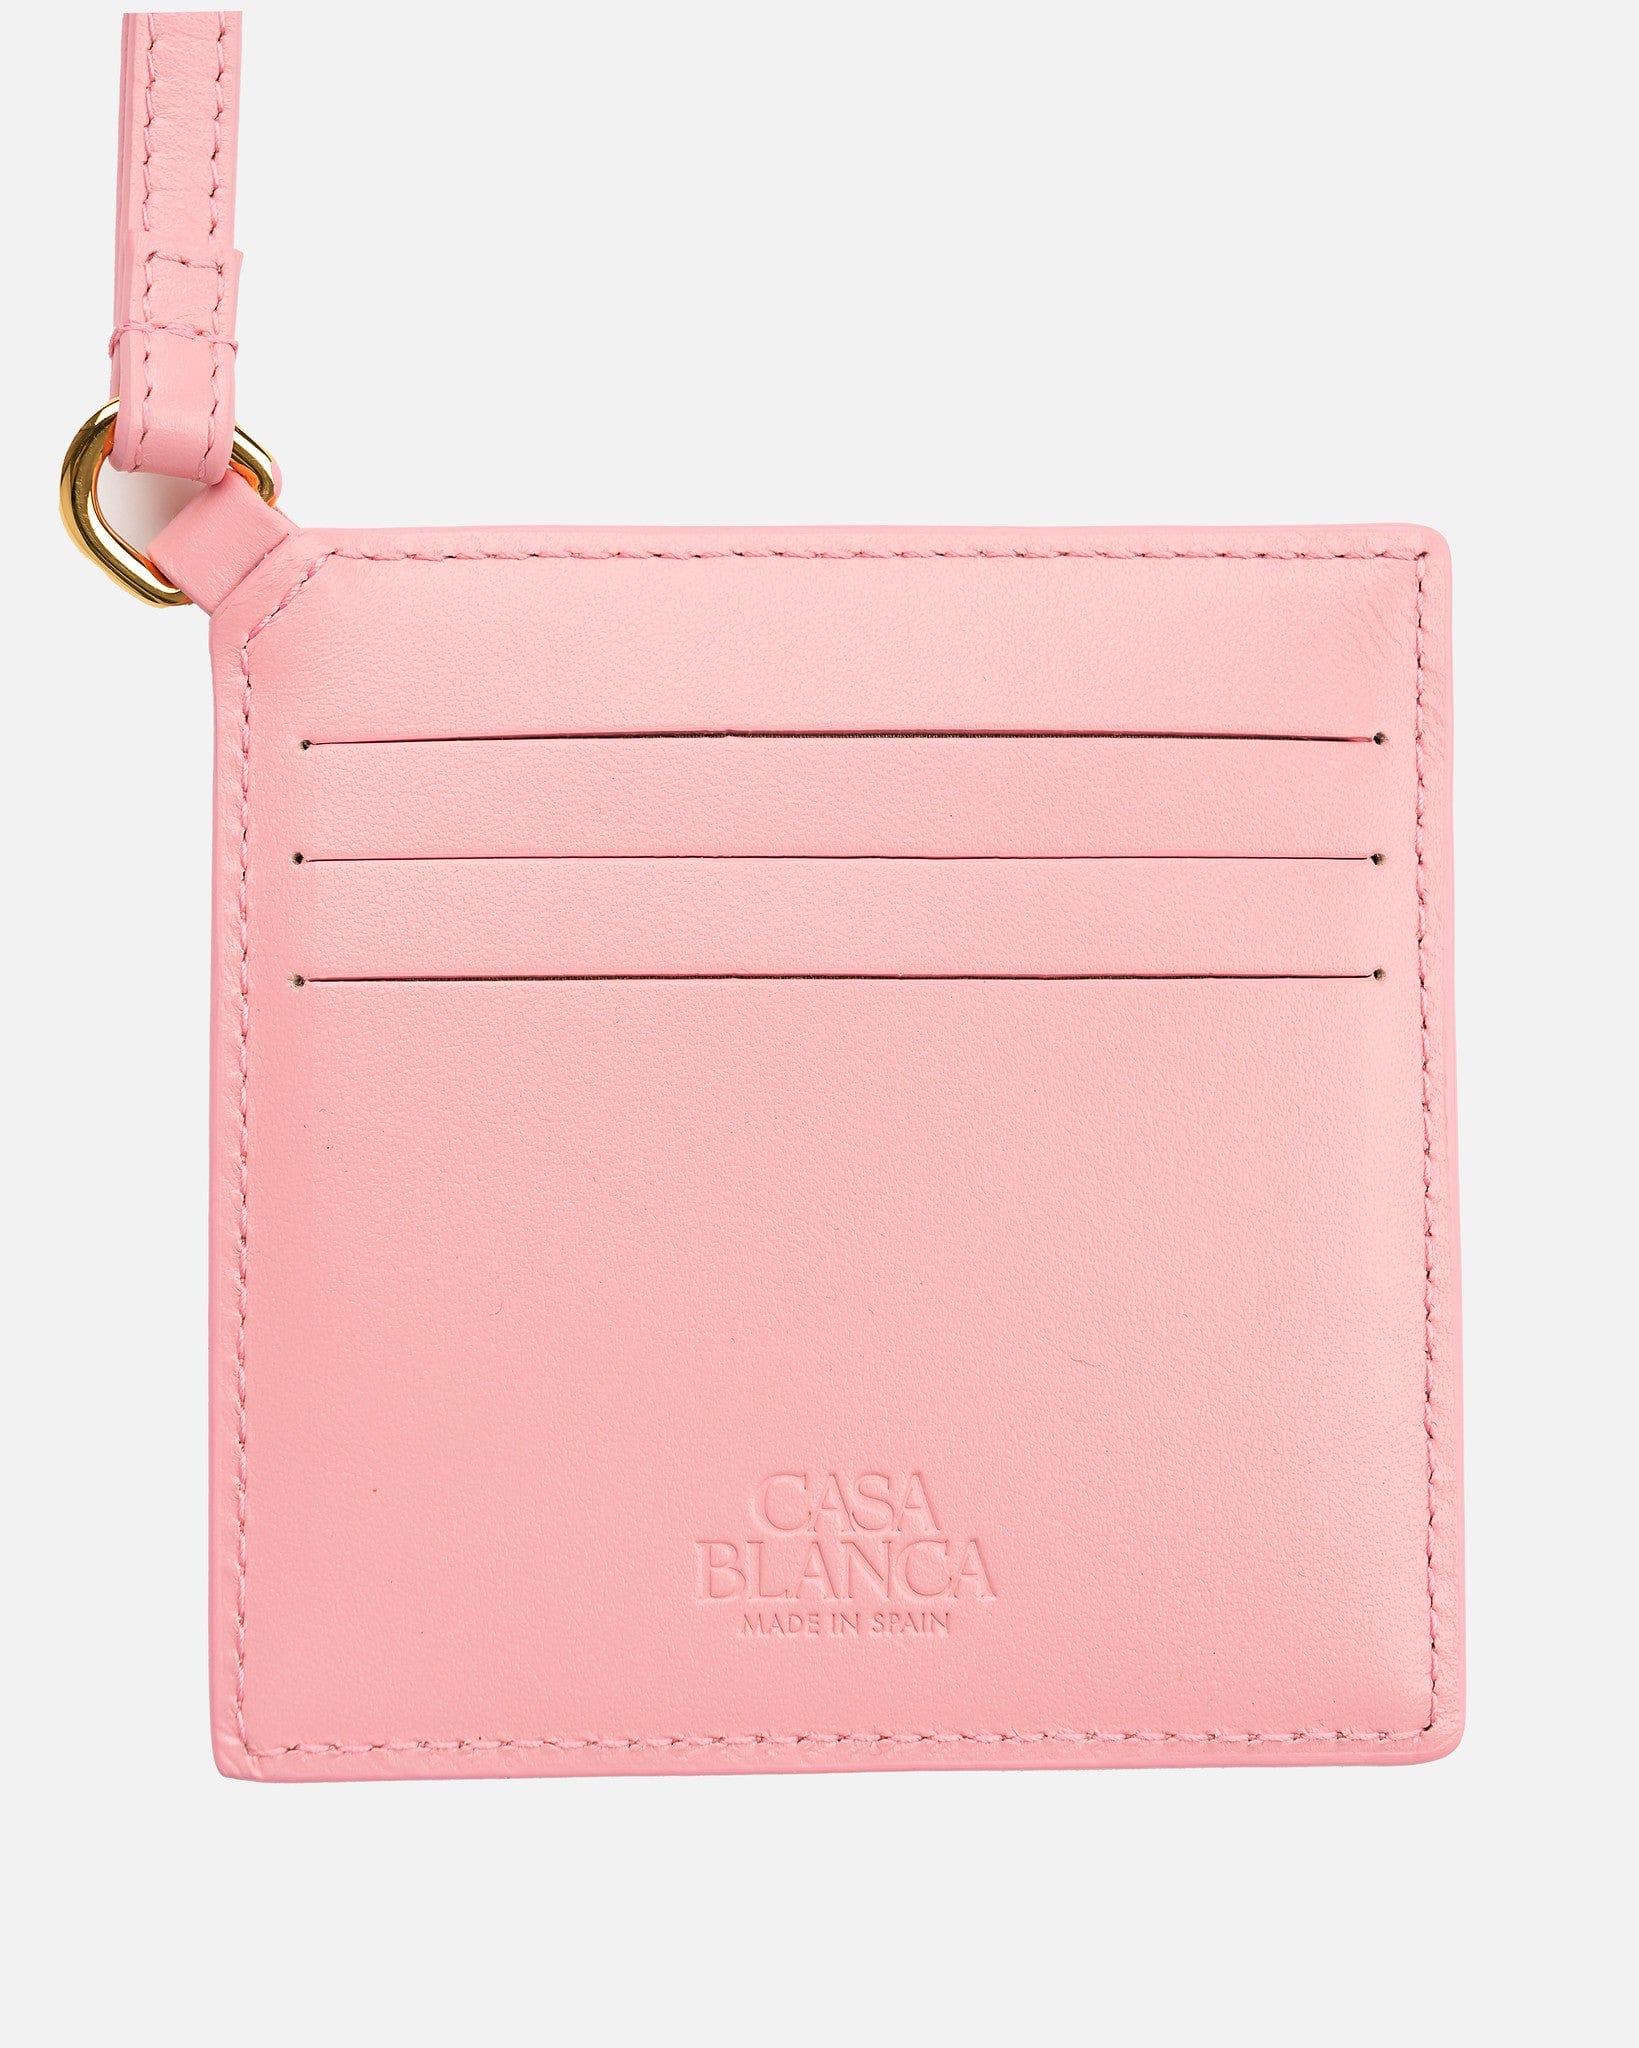 Casablanca Leather Goods Card Holder in Pink